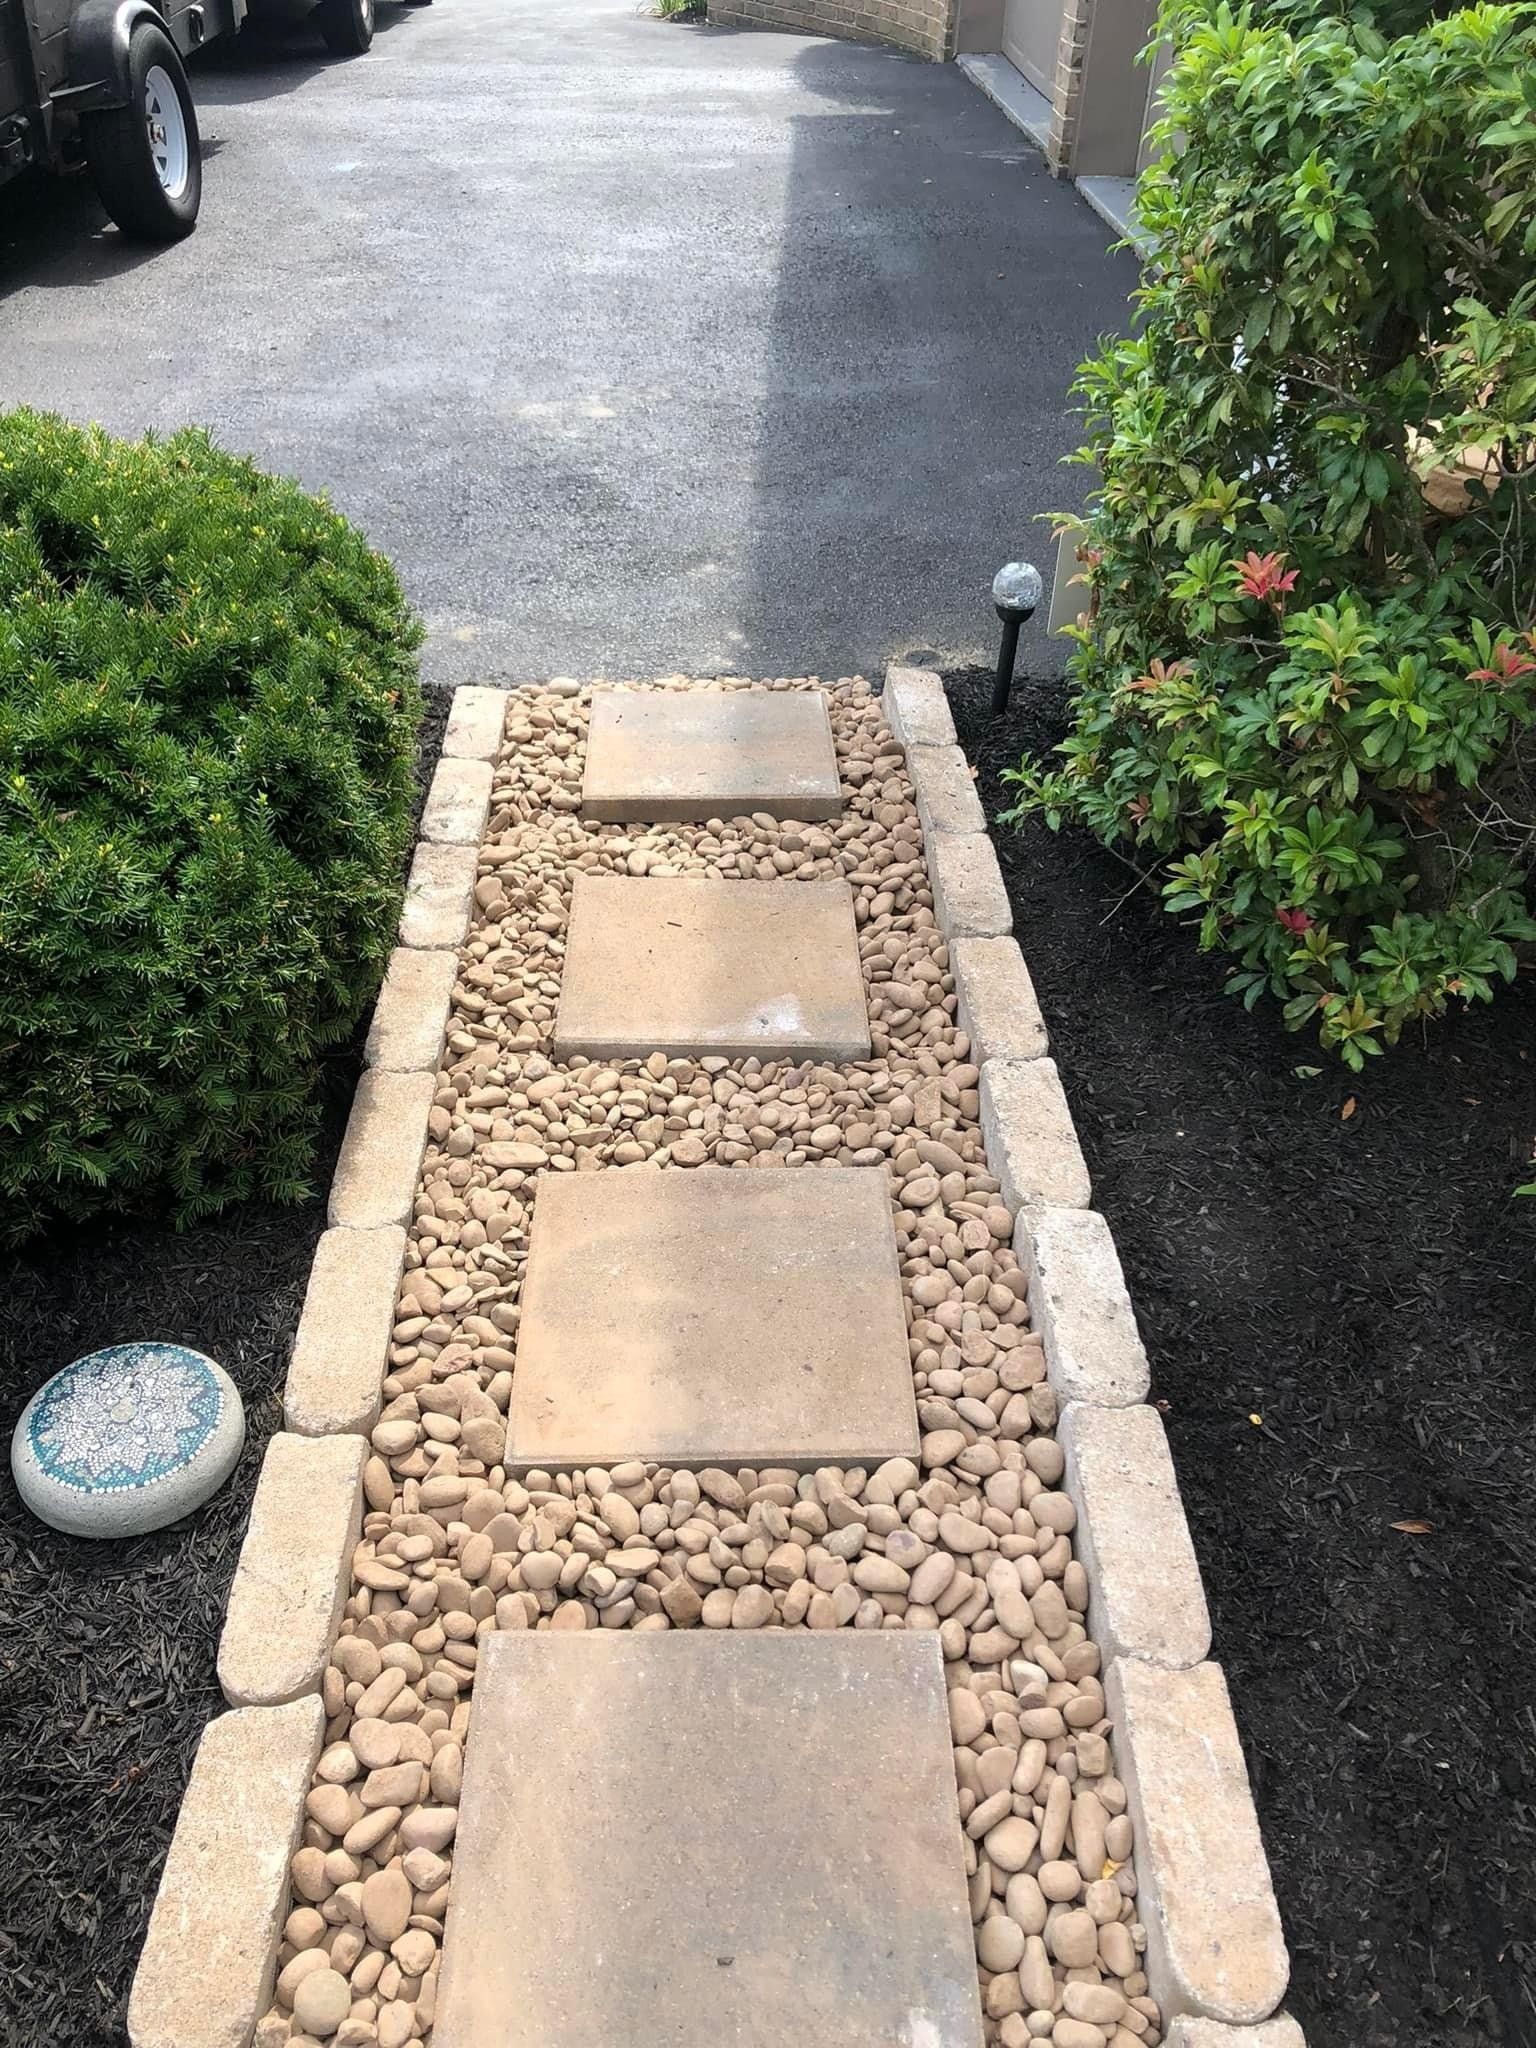 A new walkway with stylish pavers and pebbles